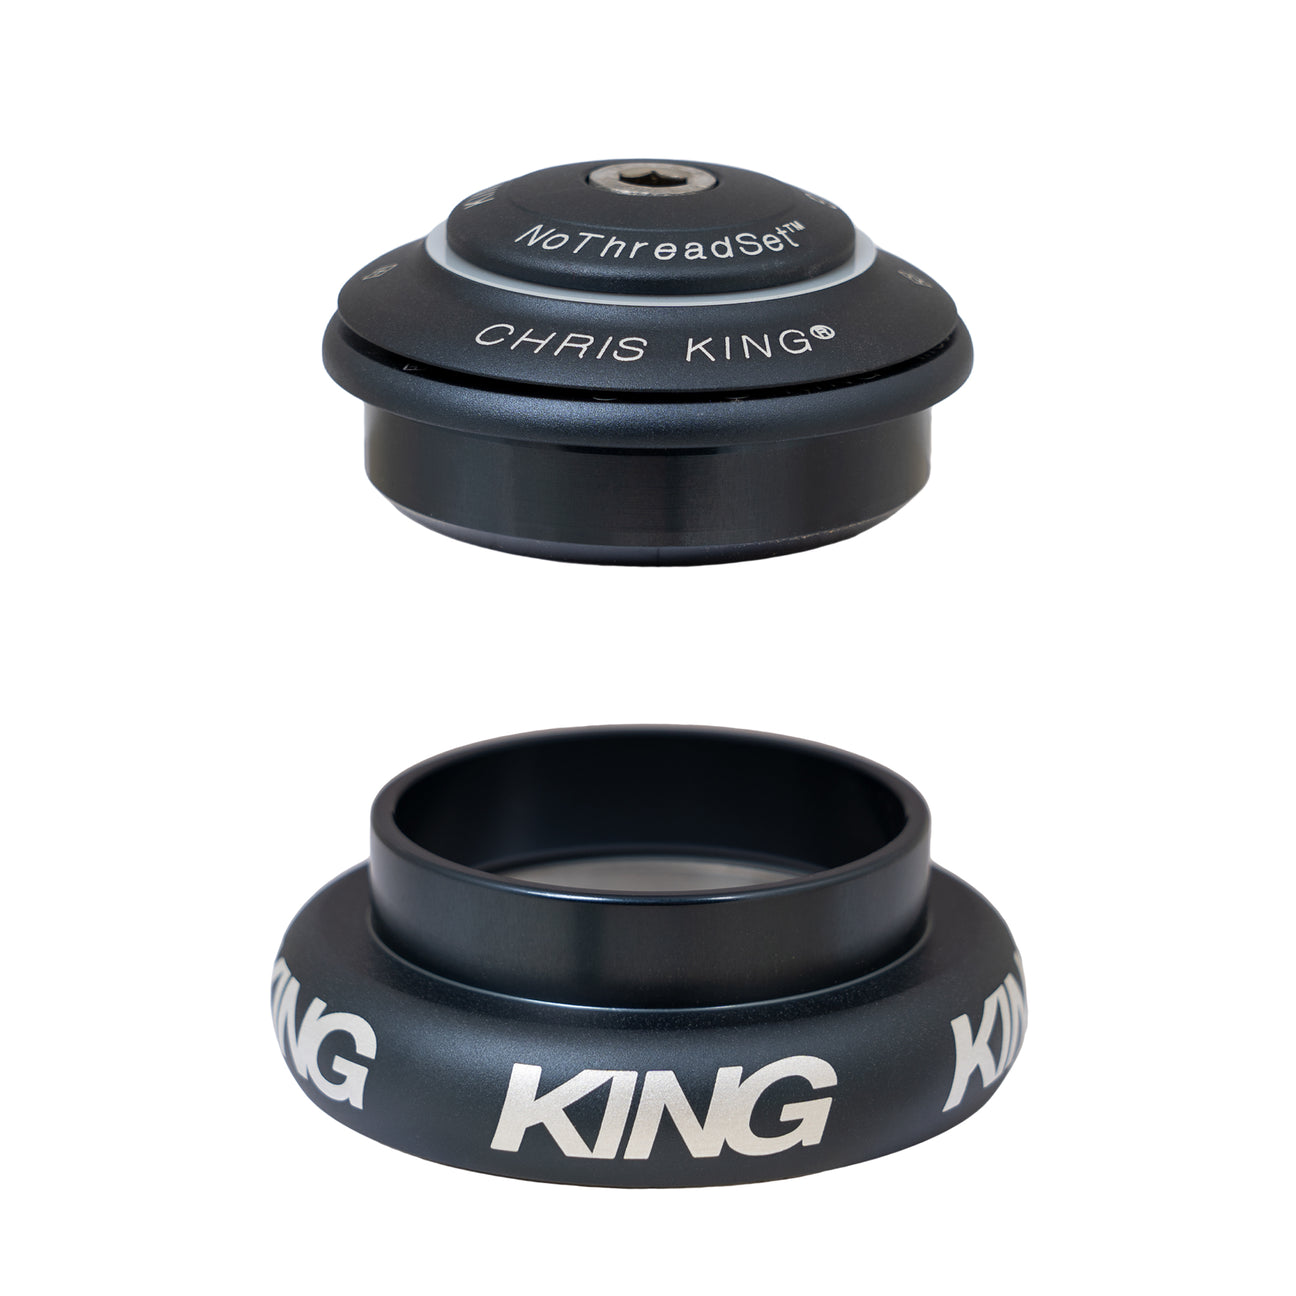 Chris King inset 7 headset in midnight